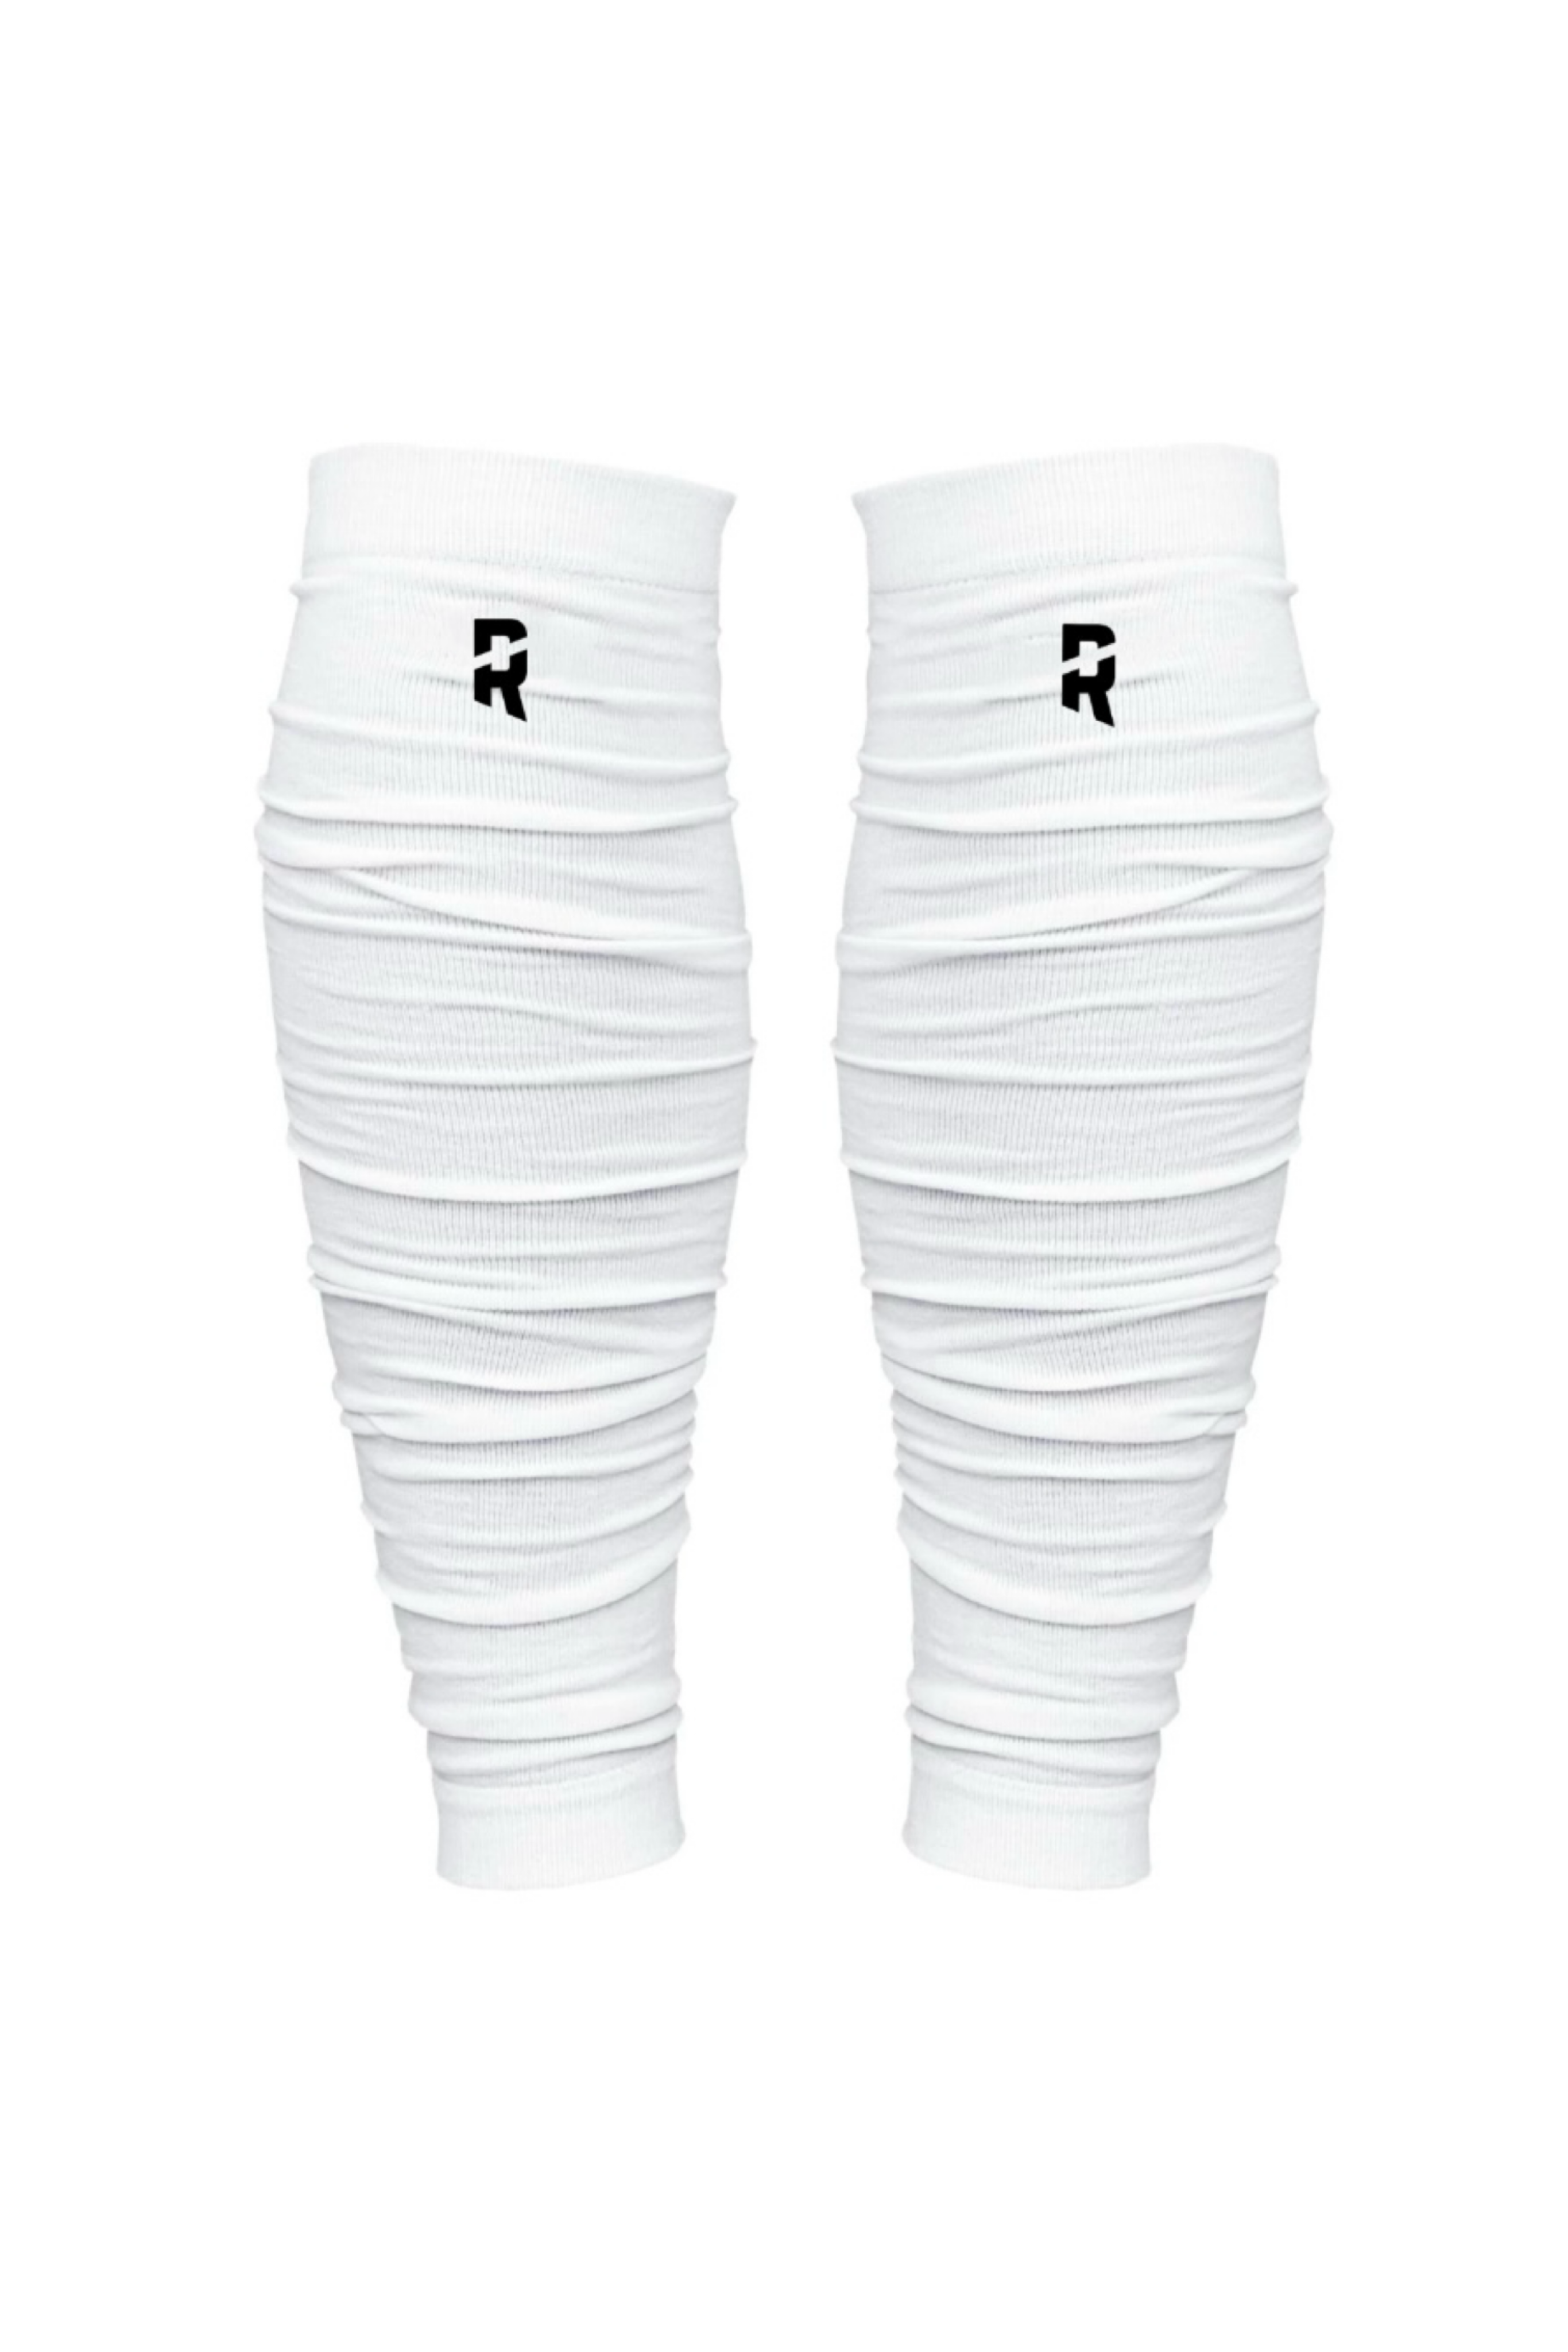 Lineman White Knitted Compression Calf Sleeves